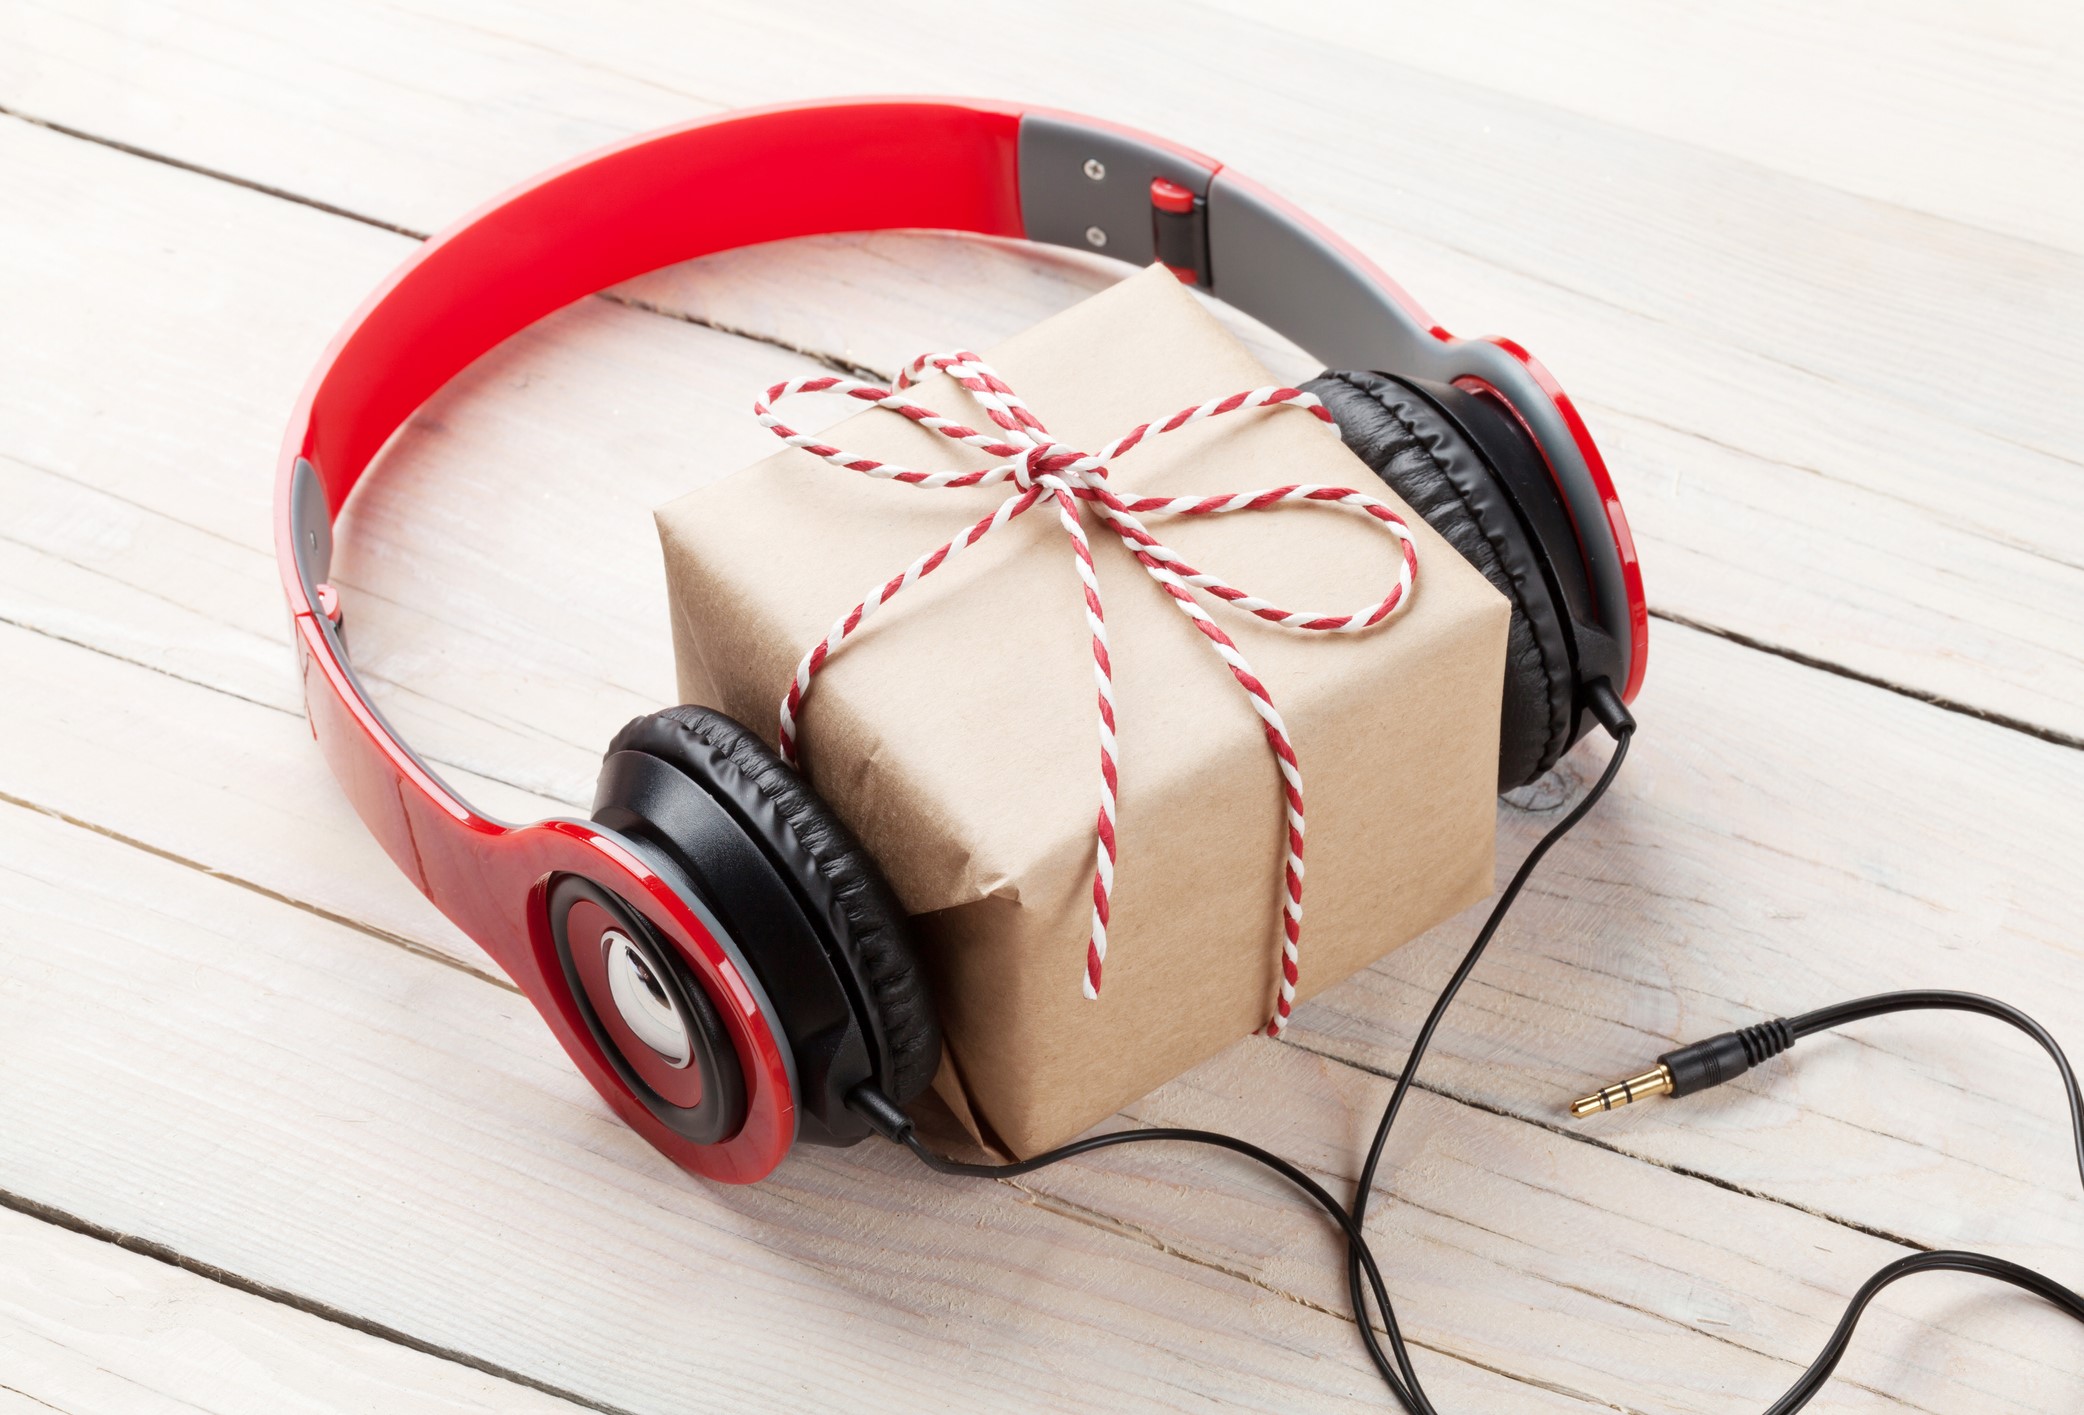 A red pair of headphones with a gift wrapped in brown paper and string